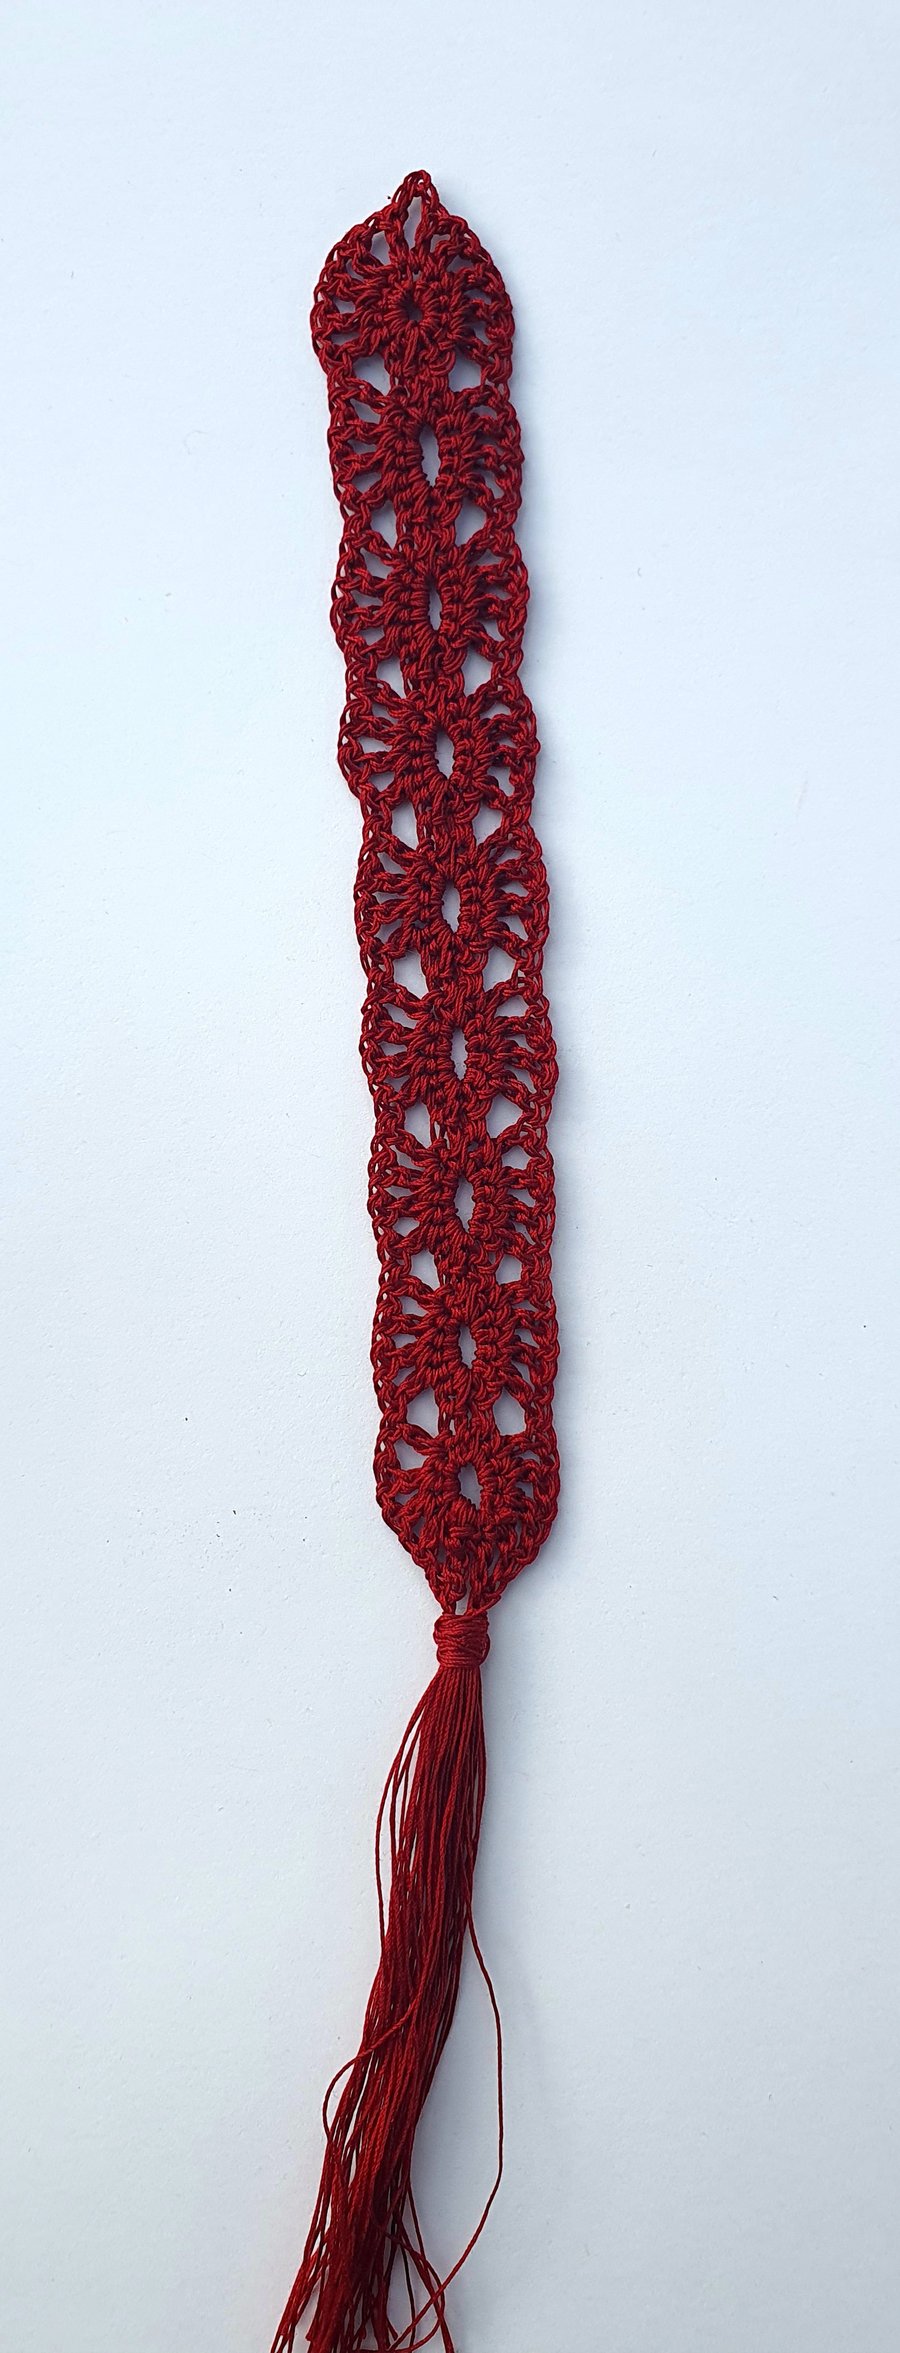 Crocheted lace bookmark, dark red.